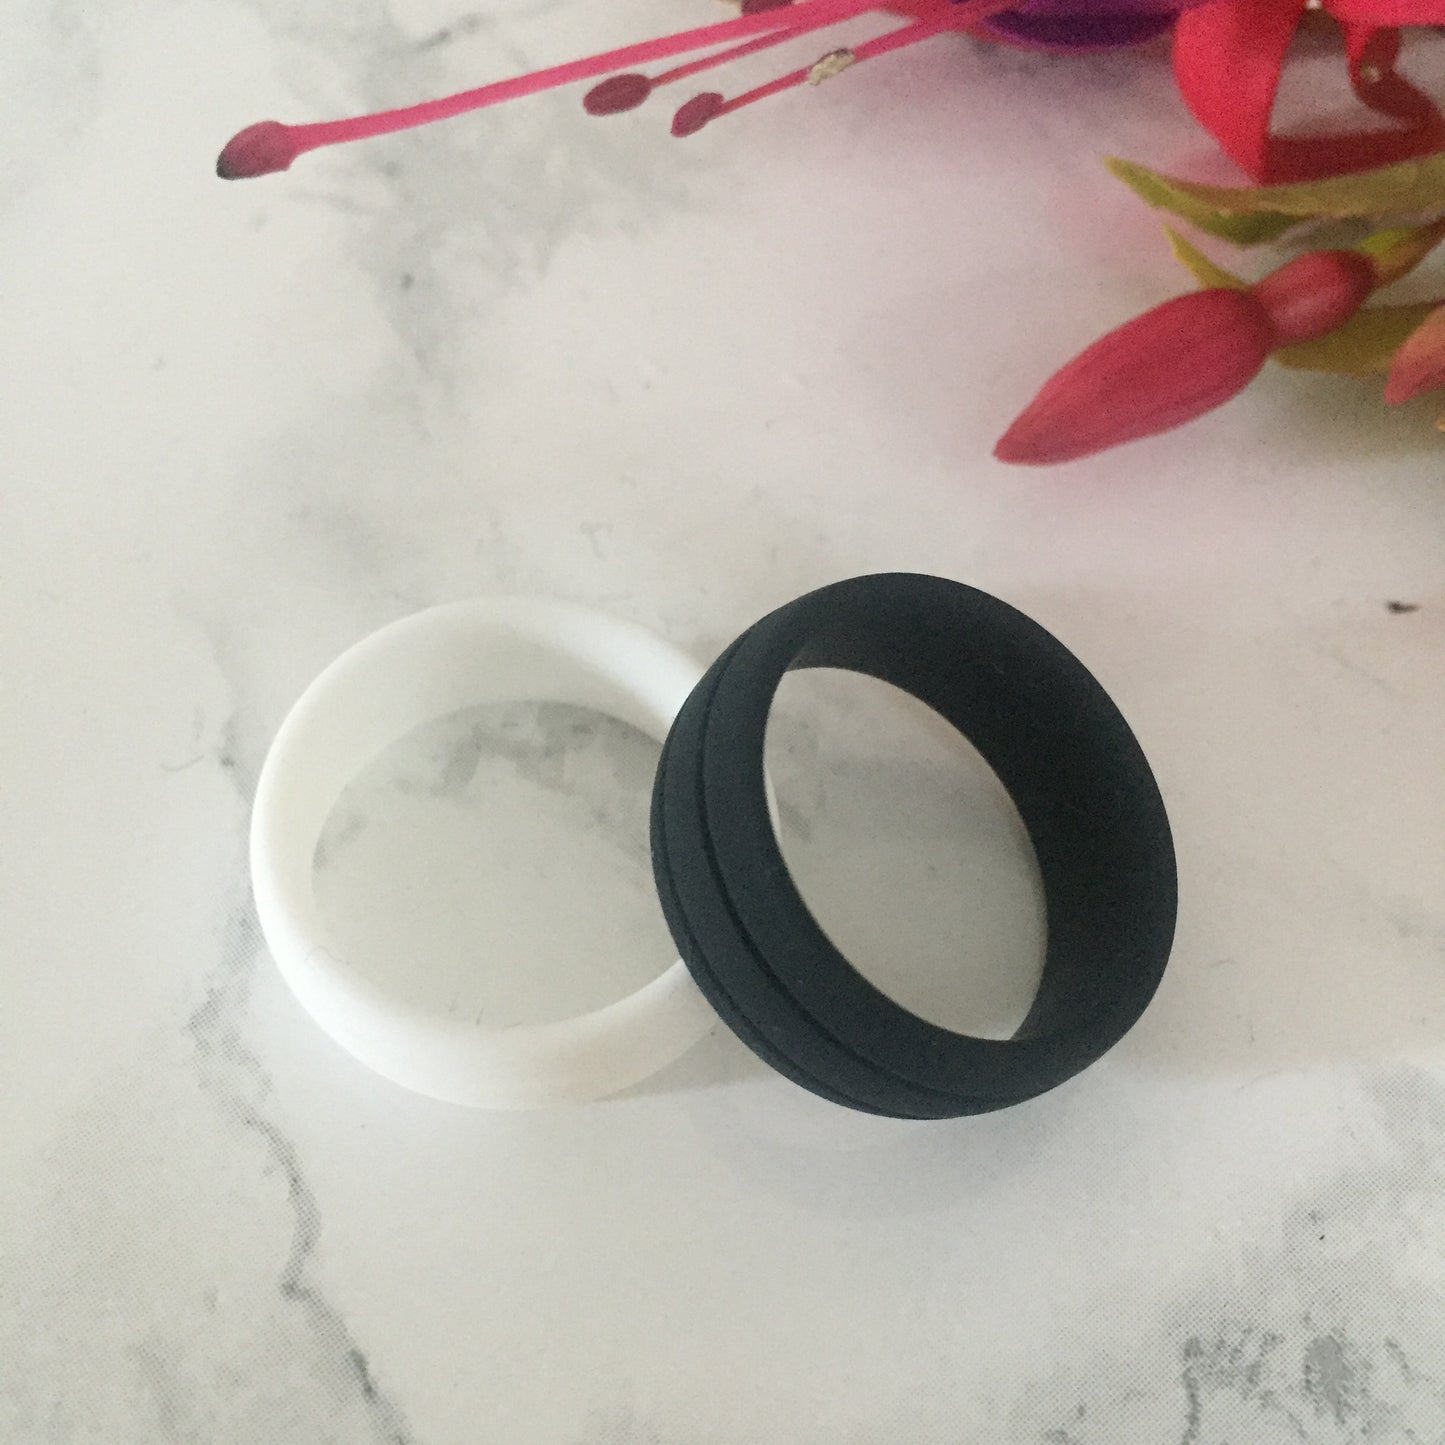 Black Double Indentation Unisex Wedding Bands, Silicone Rings for Women and Men - 8mm